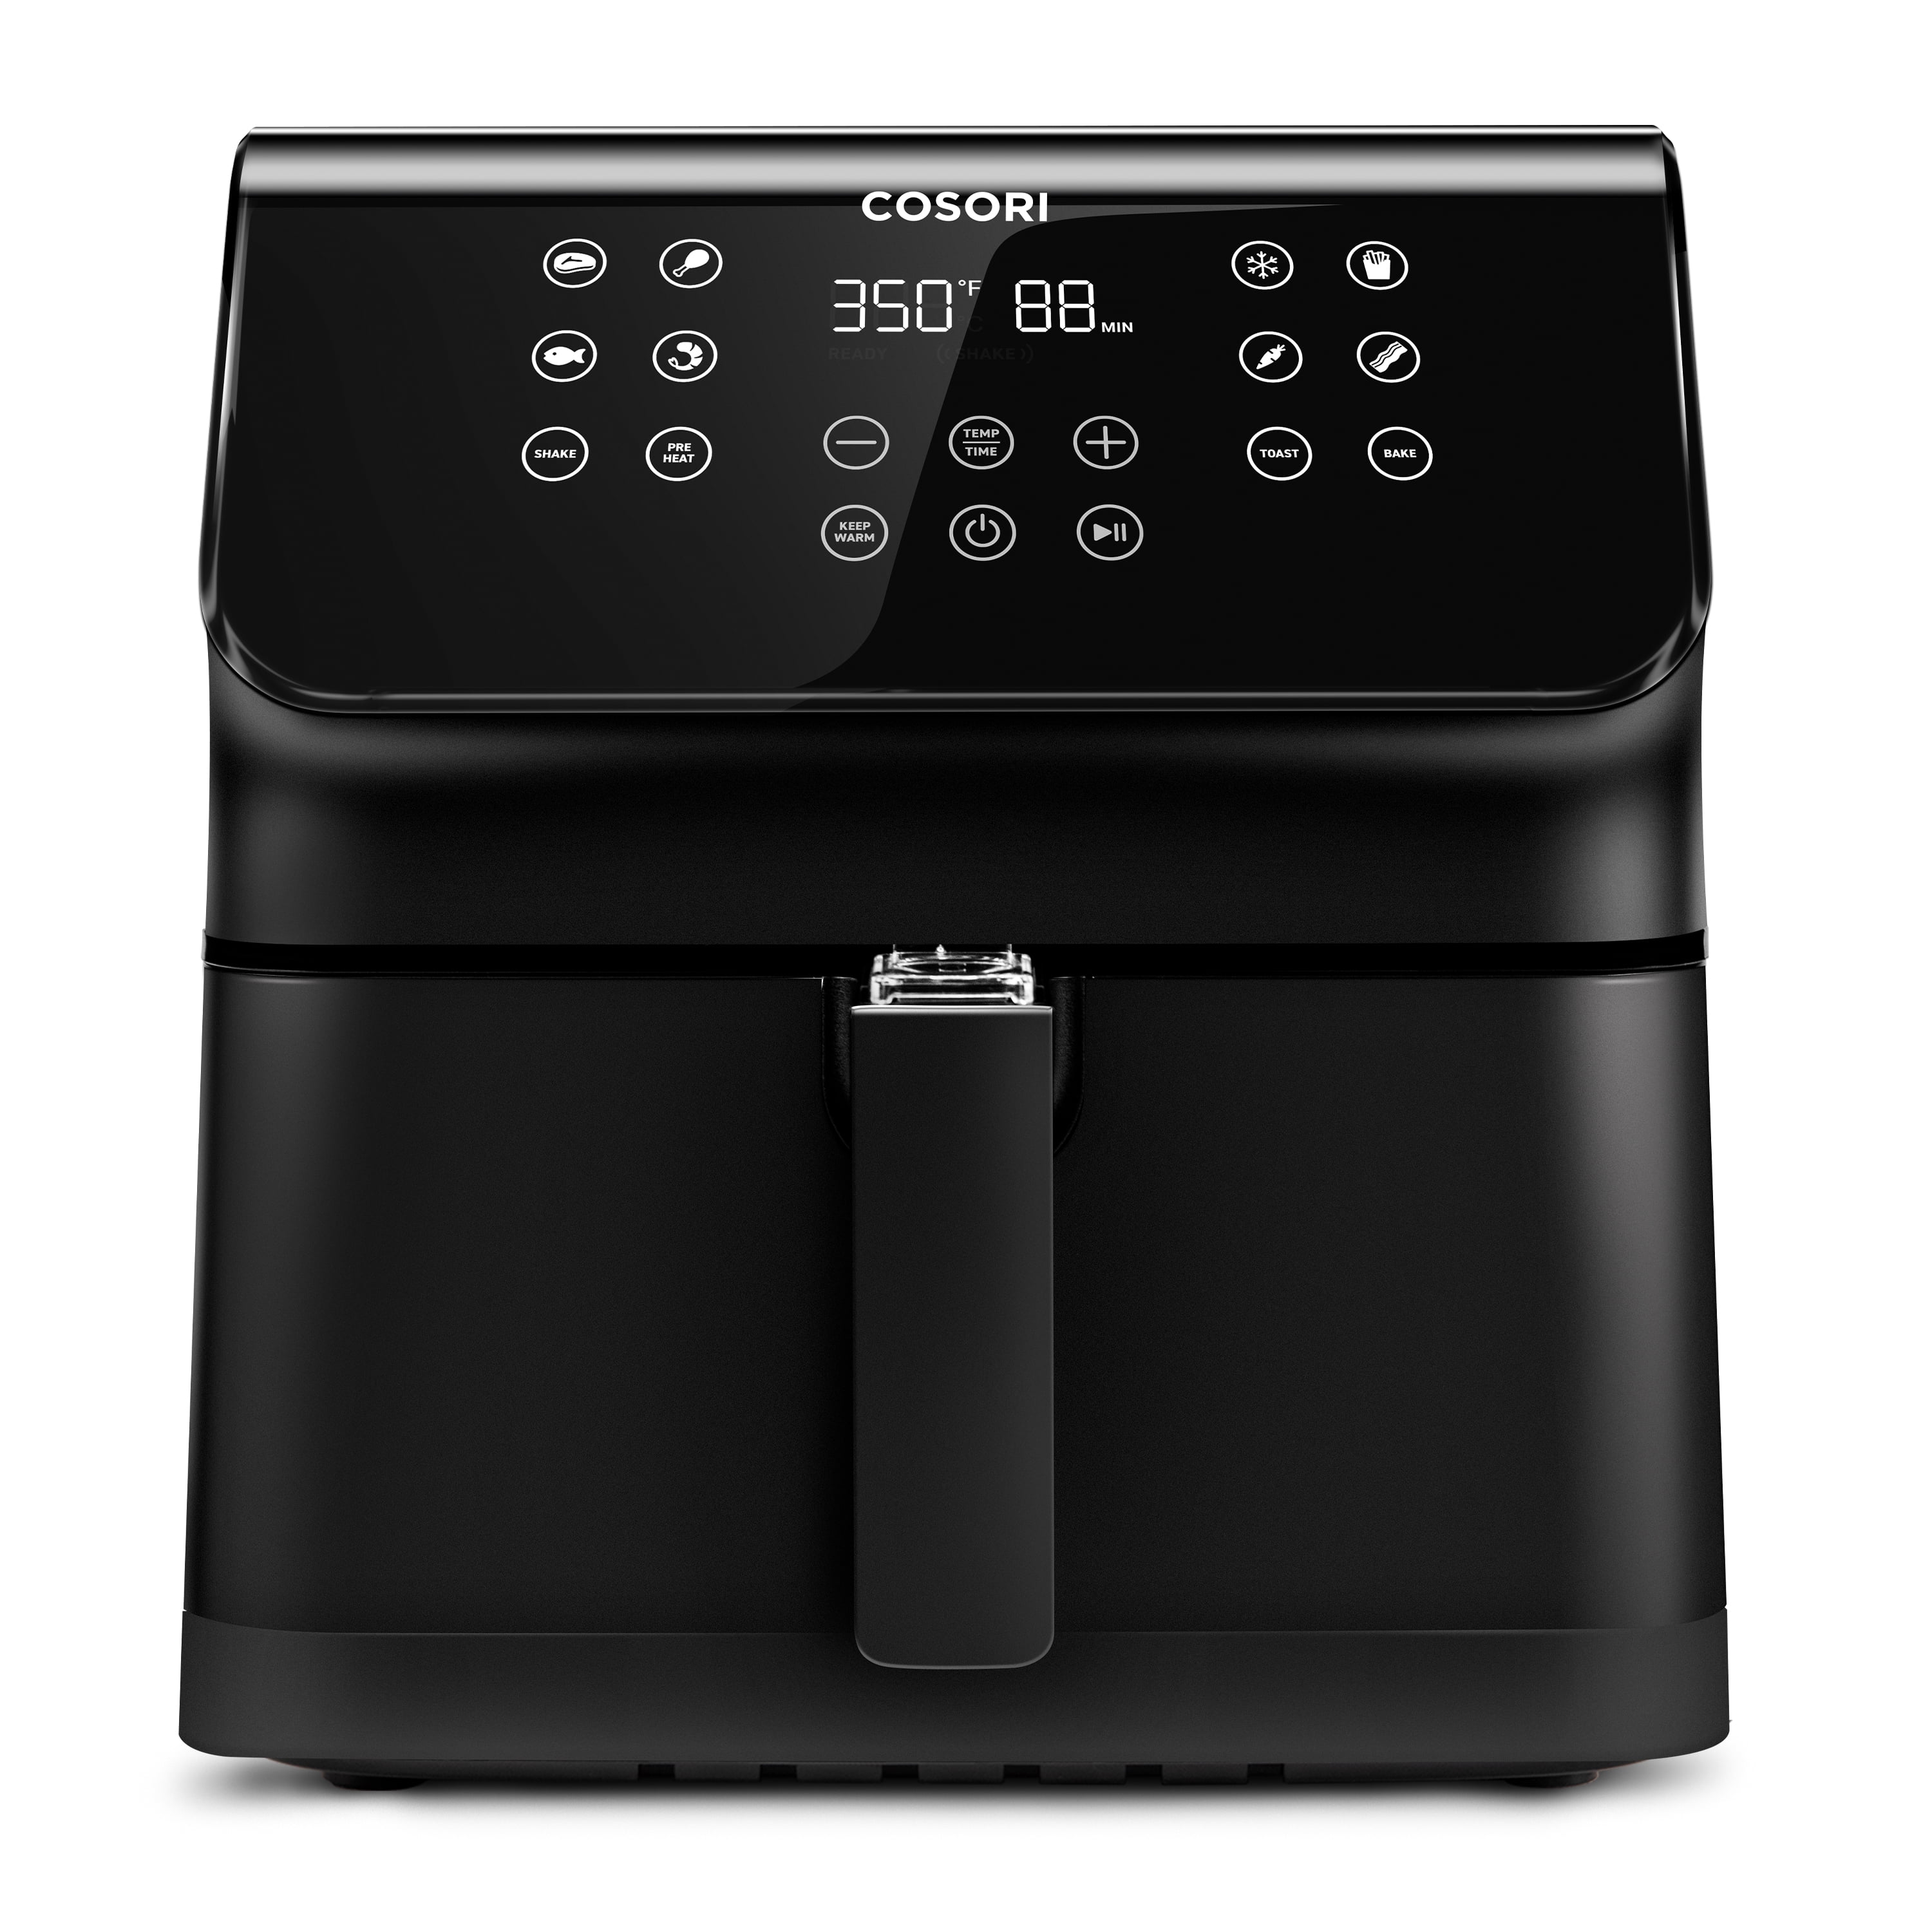 COMFEE' 5.8Qt Digital Air Fryer, Toaster Oven & Oilless Cooker, 1700W with  8 Preset Functions, LED Touchscreen, Shake Reminder, Non-stick Detachable